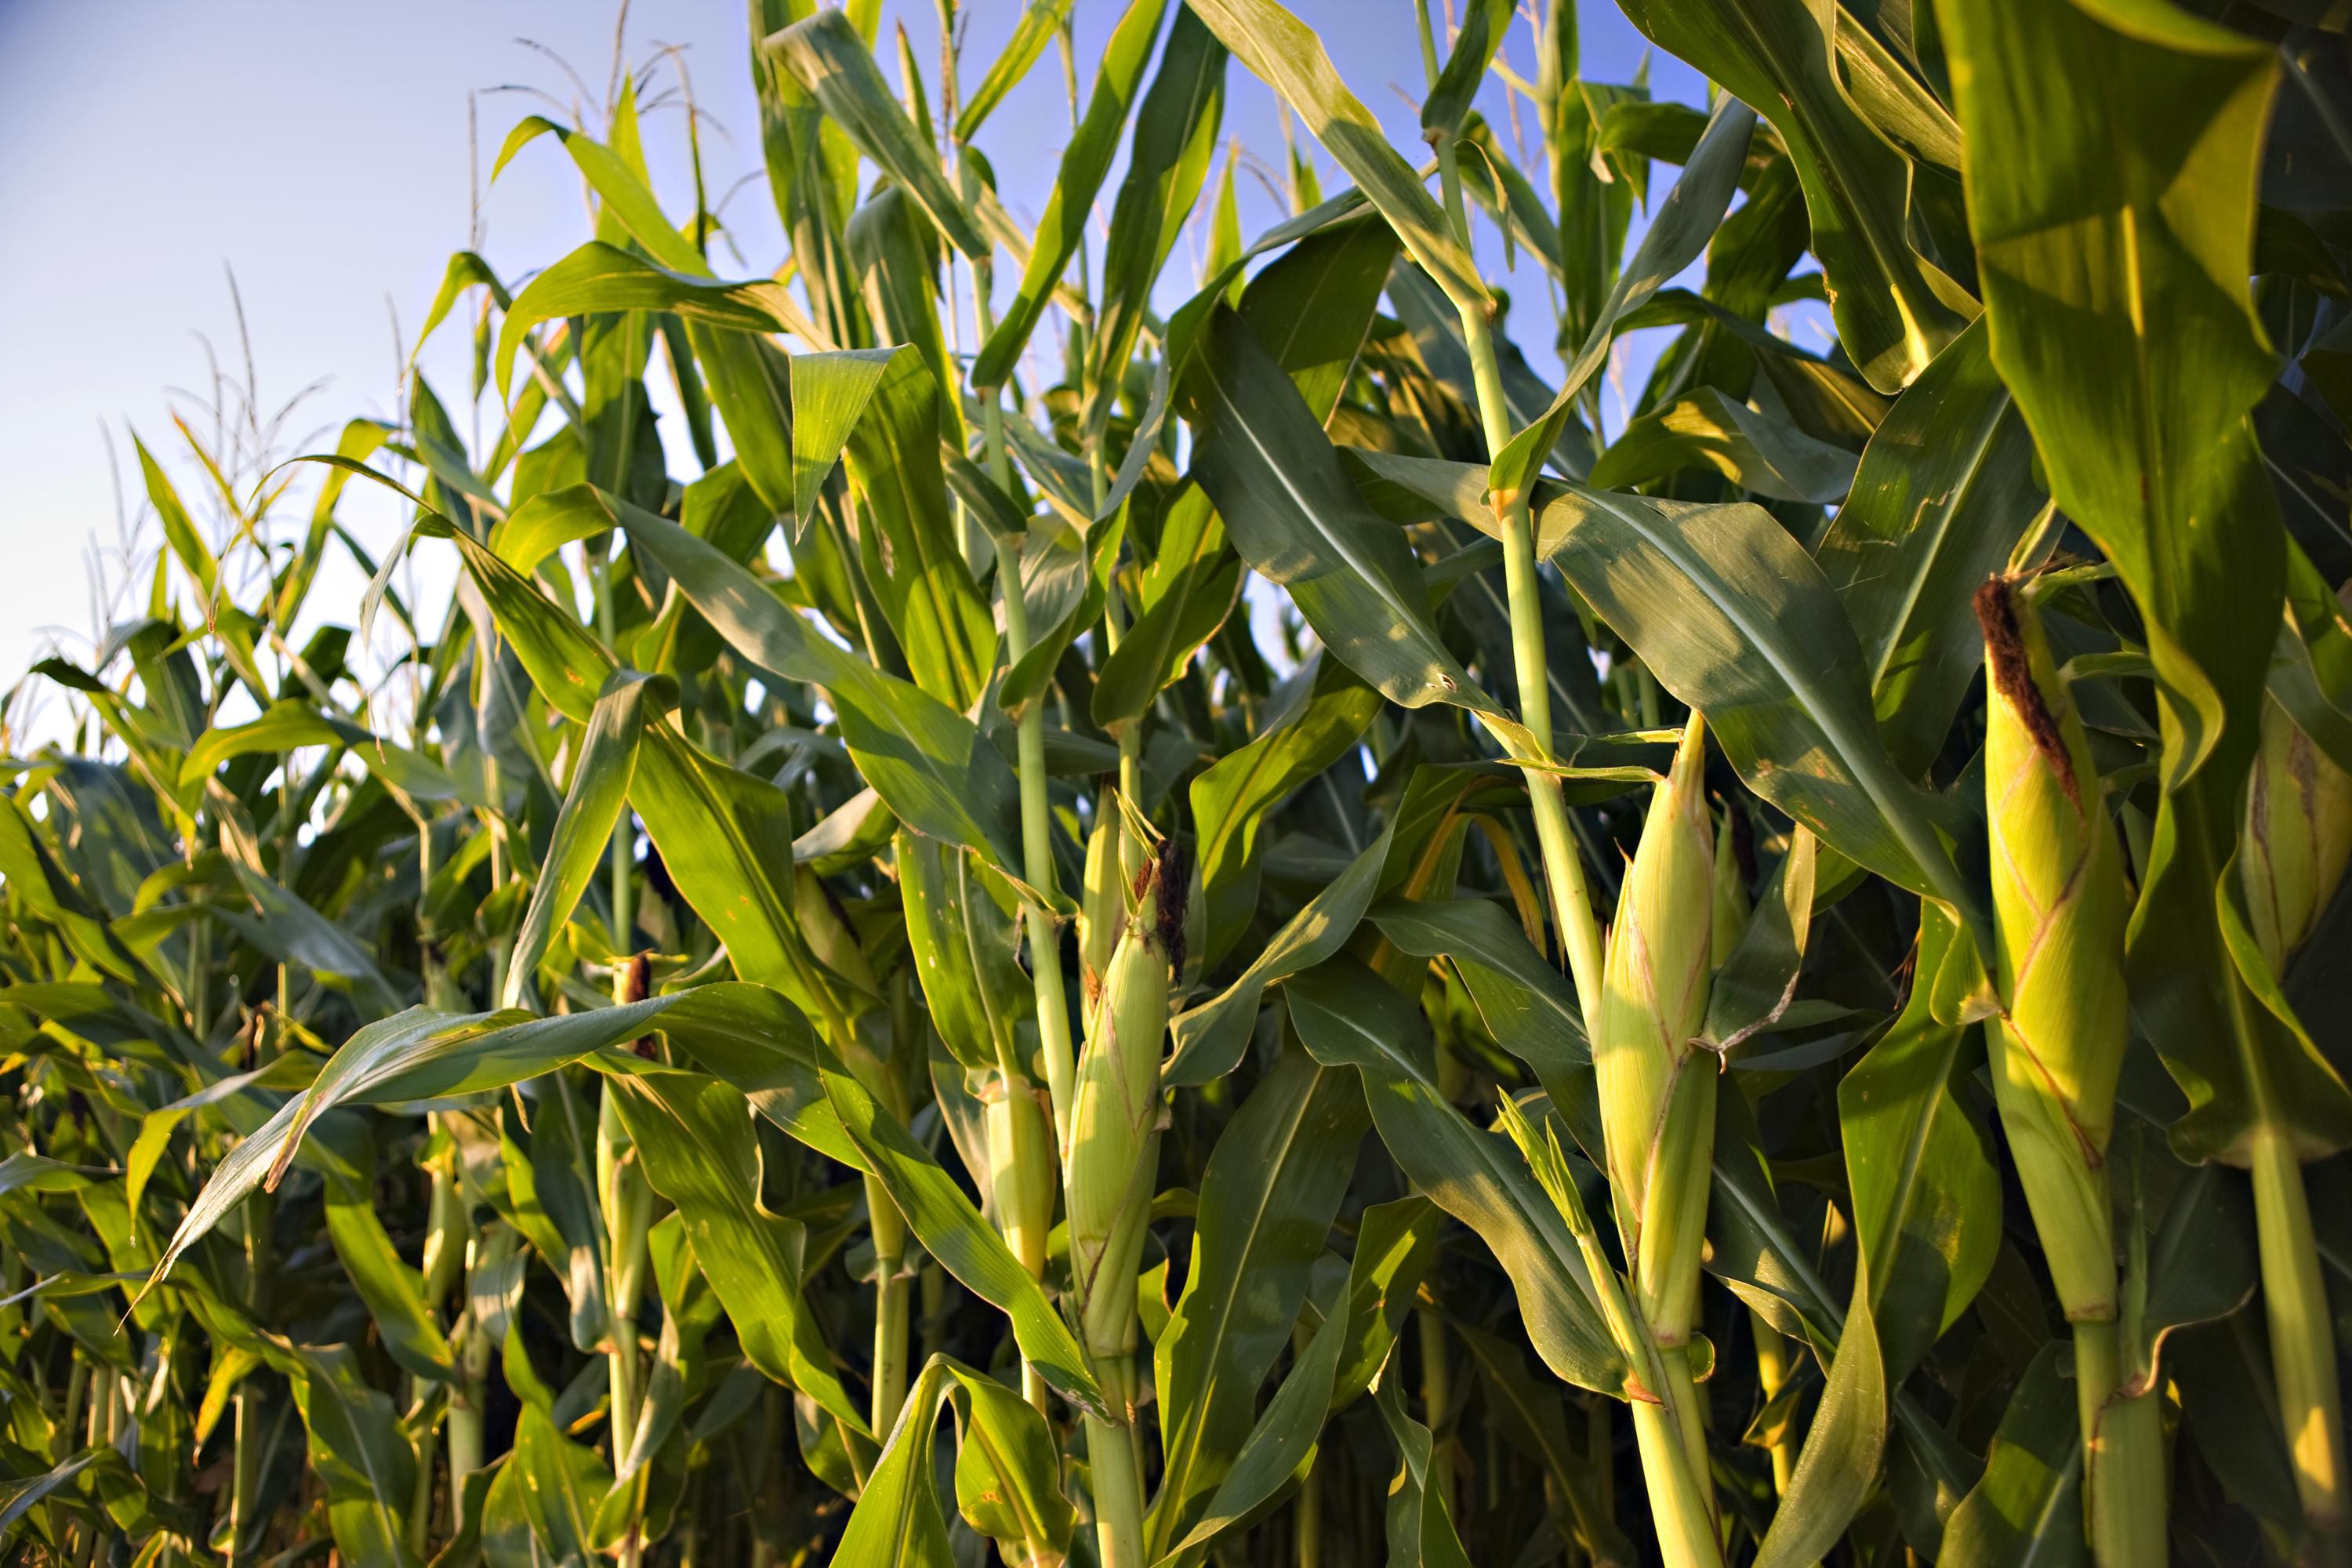 USDA Weekly Crop Progress Report Show Corn and Soybeans Continue to Slowly Slip